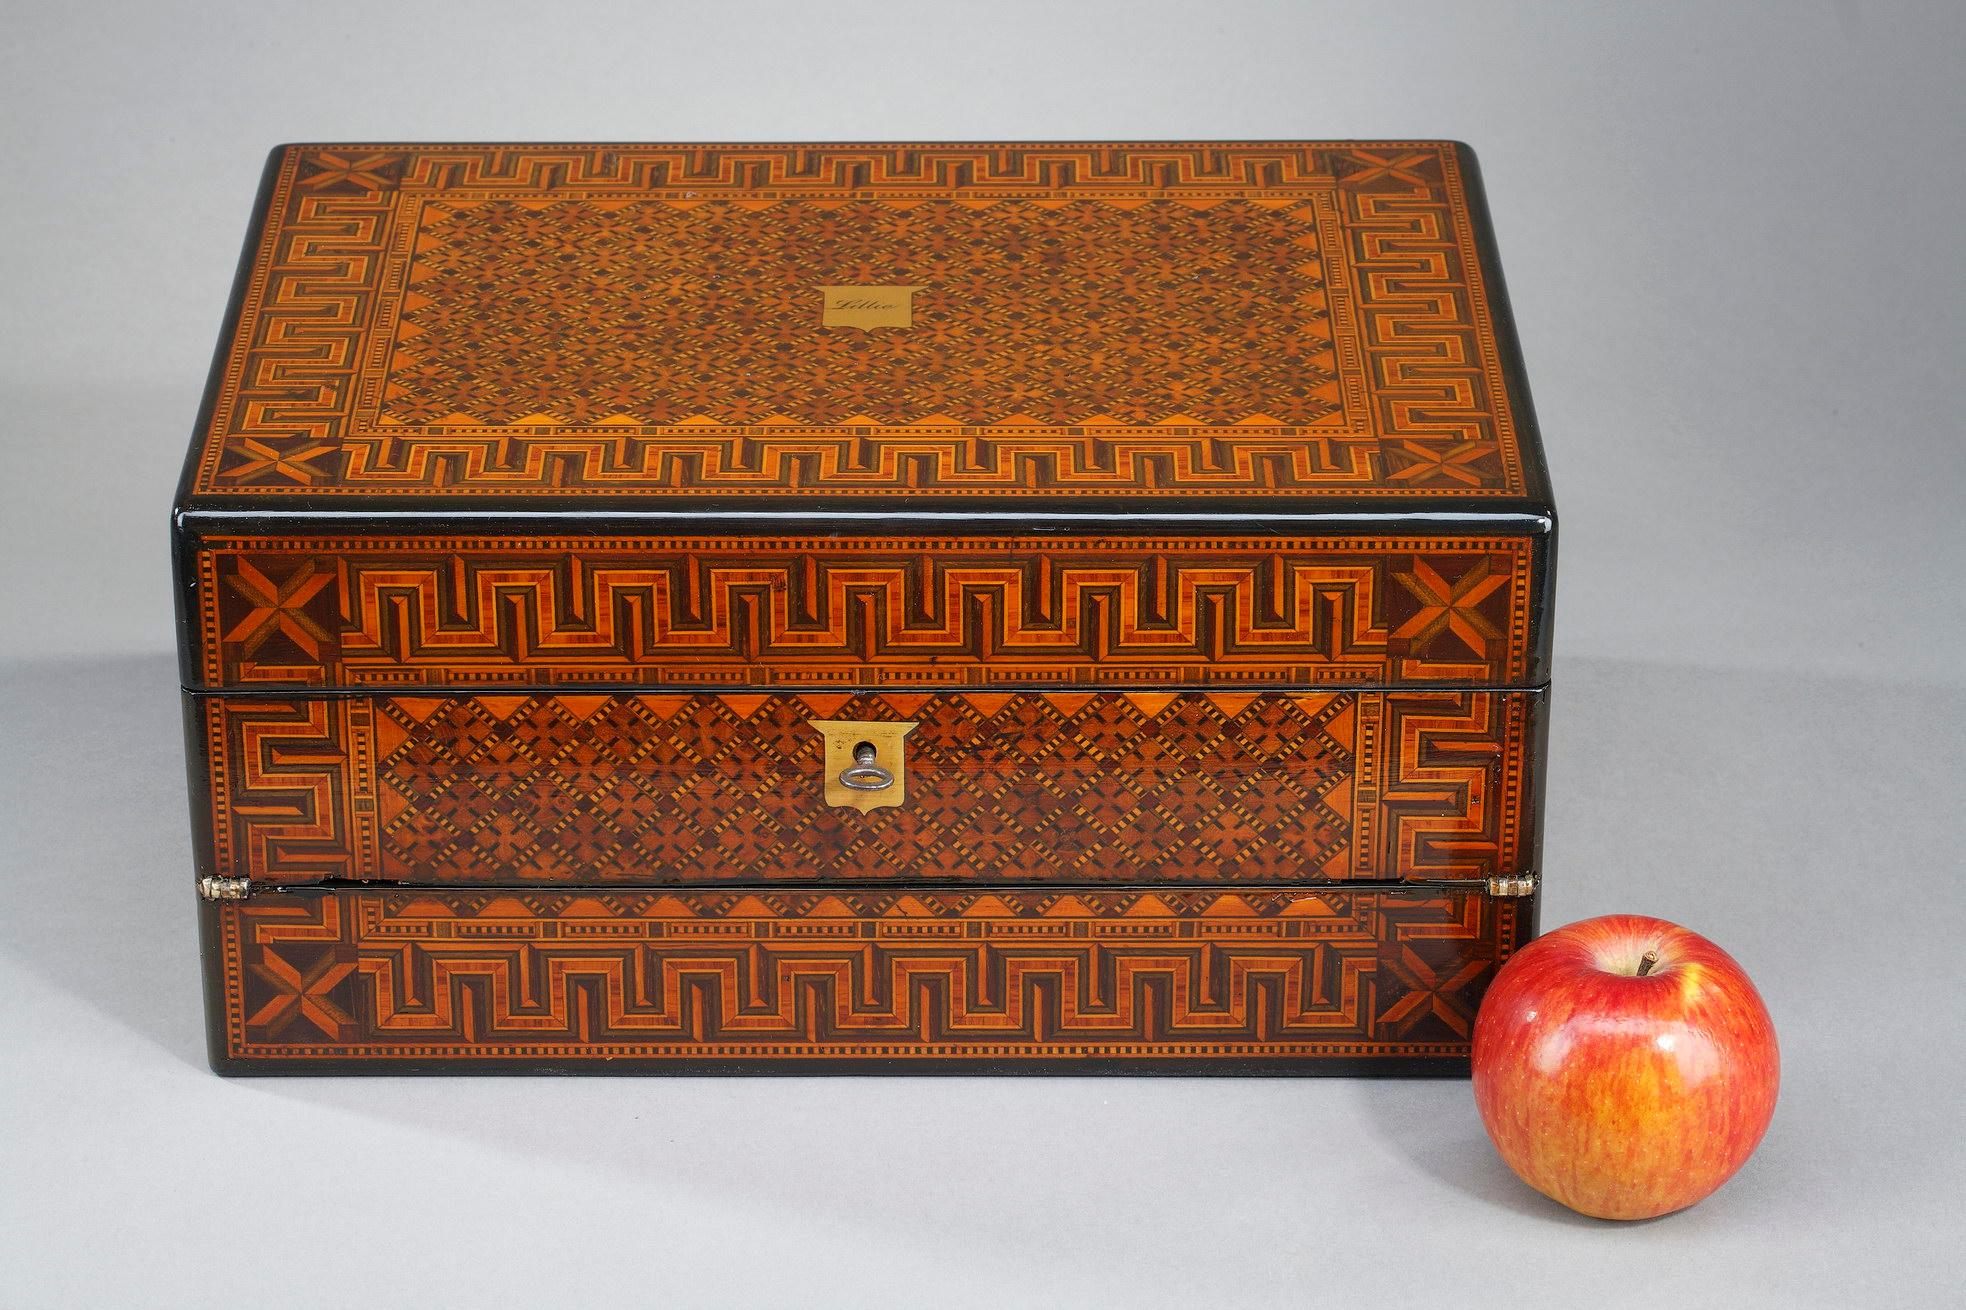 Rectangular box of the XIXth century, with inlaid decoration of crosses in frames of Greek motifs. On the lid is inscribed the name 